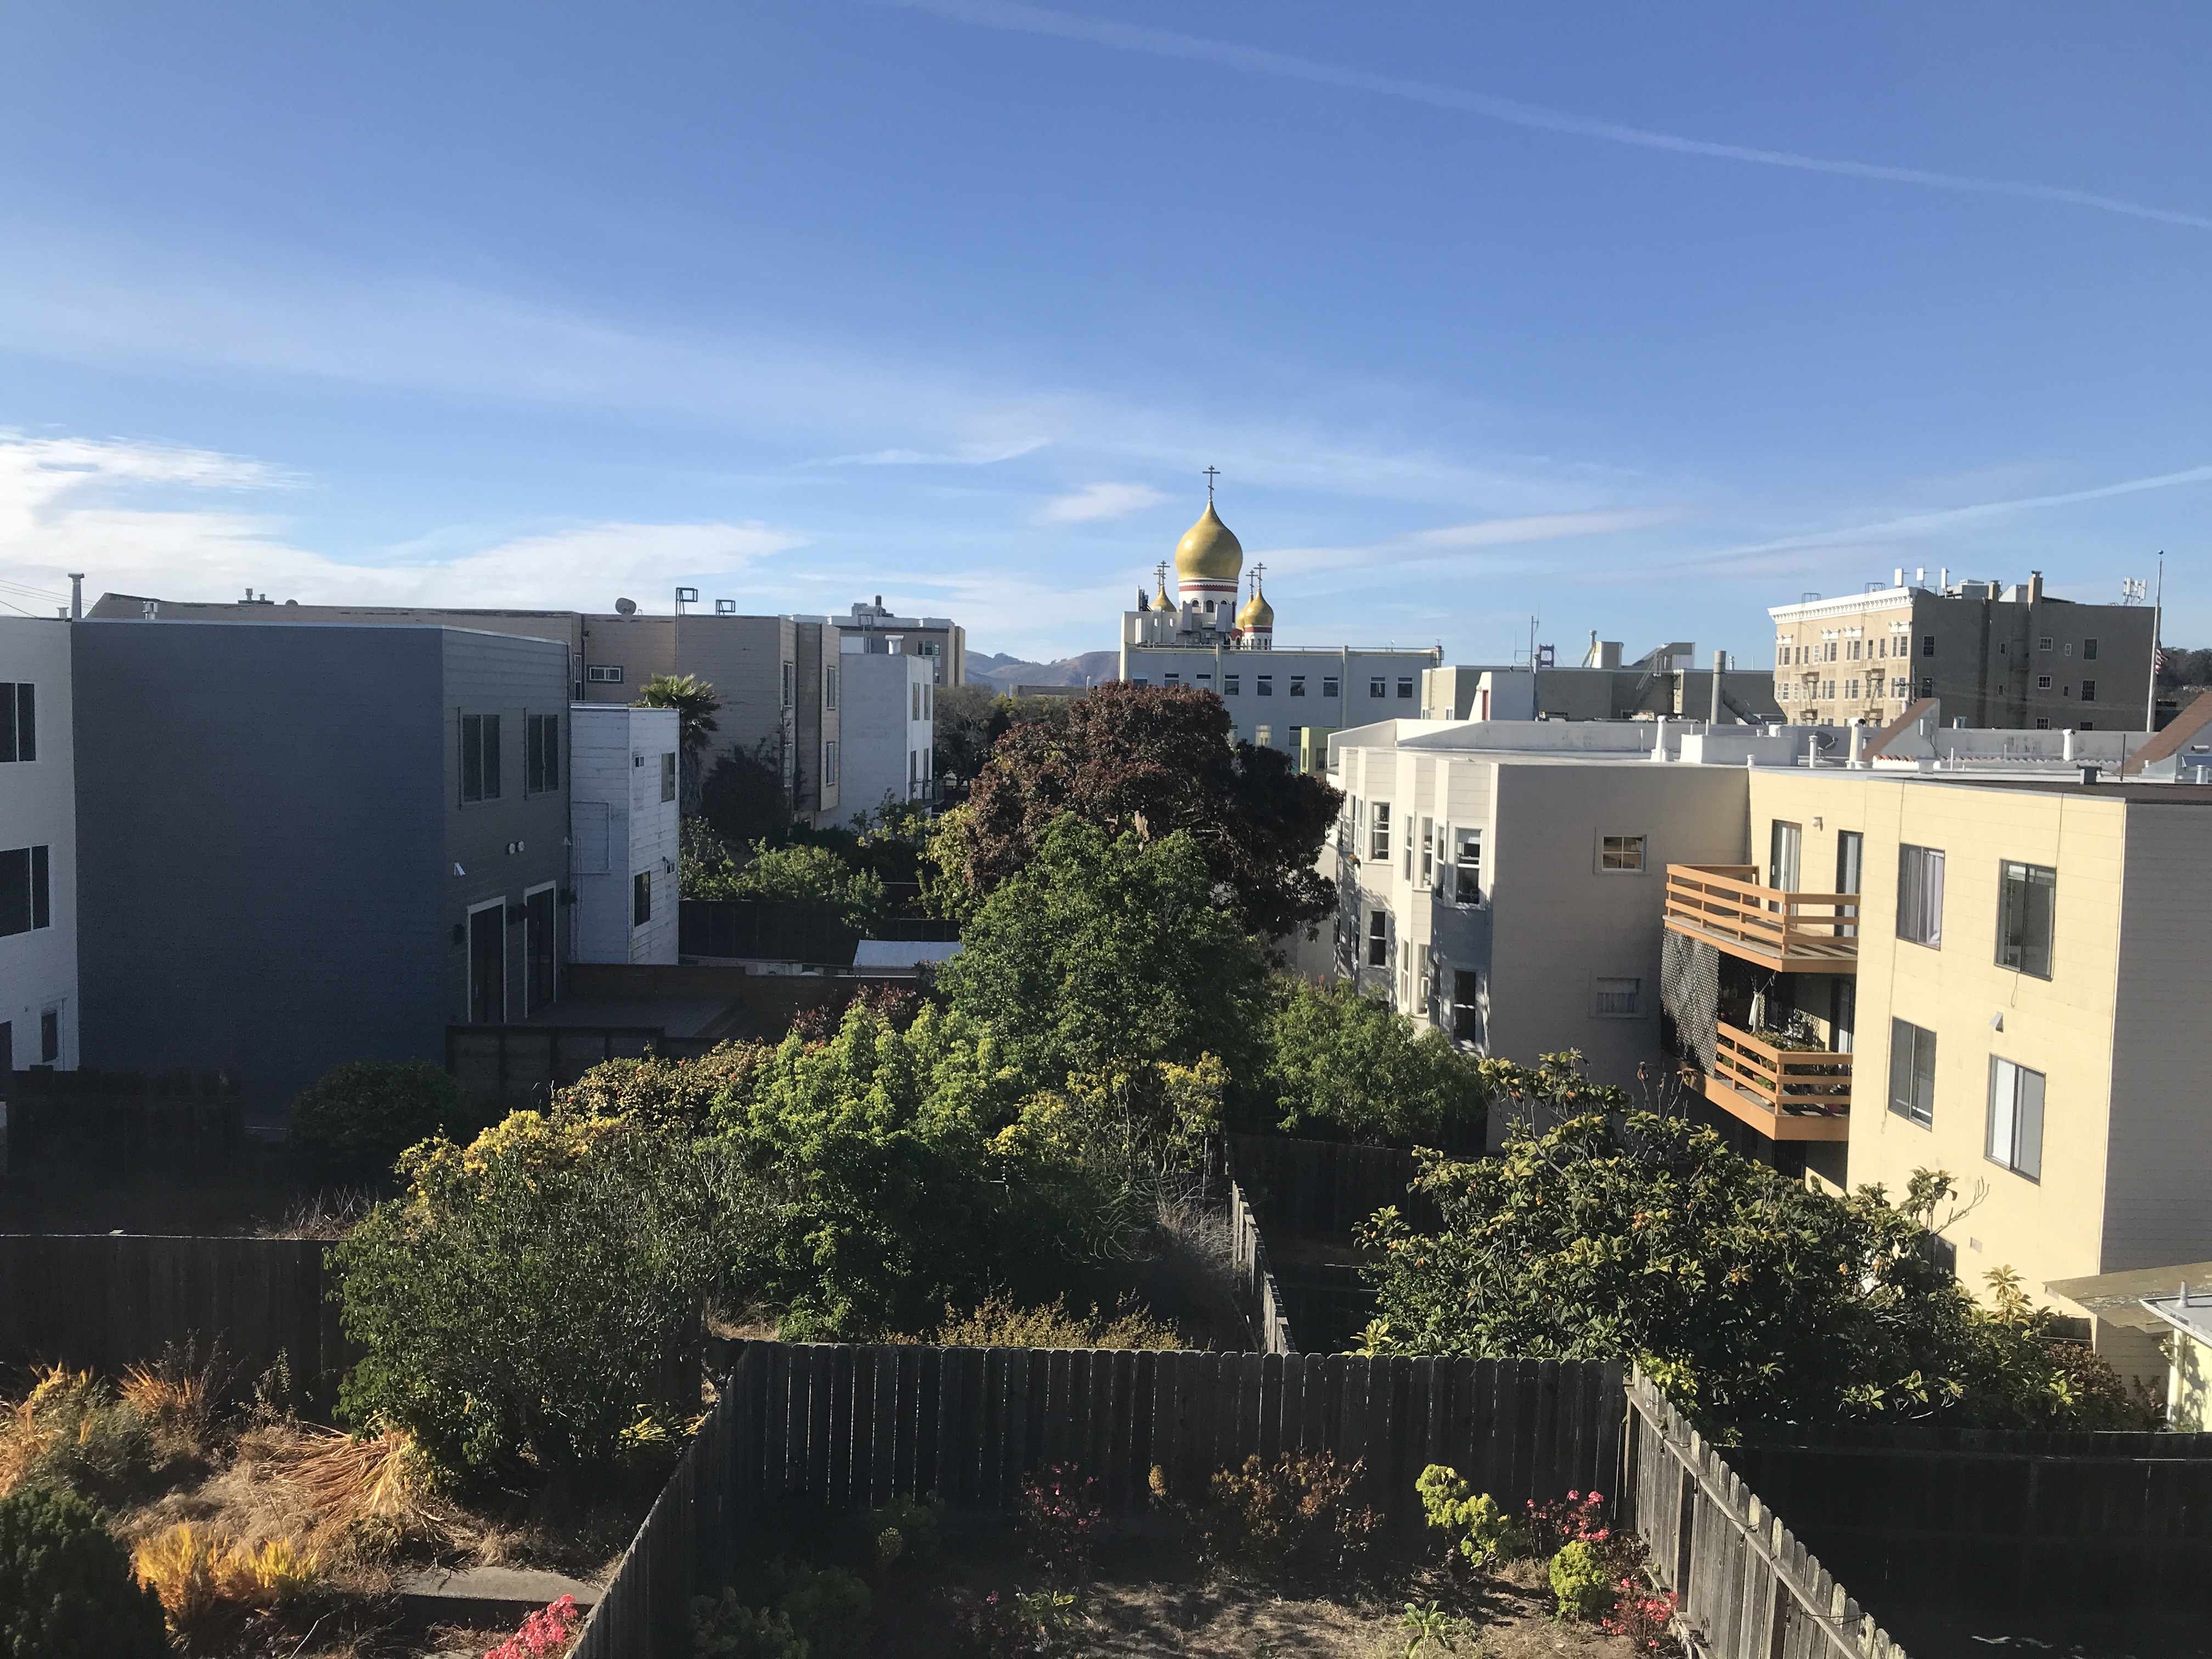 A row of apartments with lots of trees in backyards. A Russian Orthodox church with yellow domes sits in the background. Clear sky with a few small clouds. The Richmond District, San Francisco, California, United States of America.